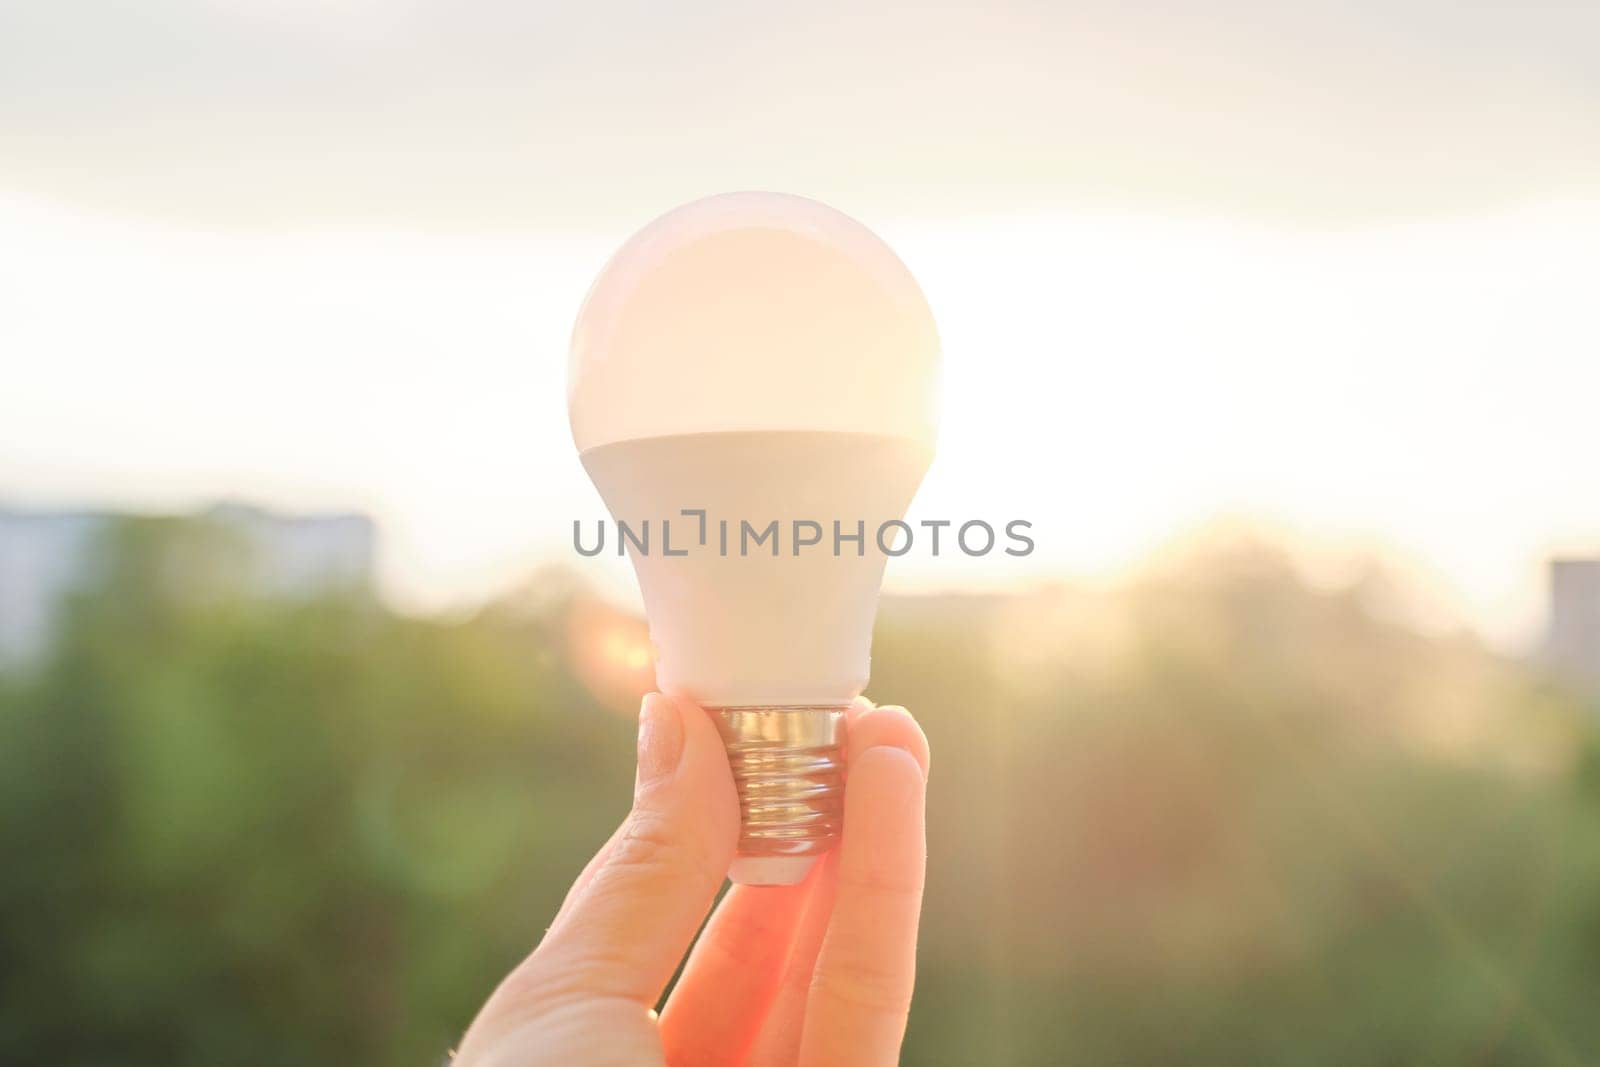 Led bulb, hand holding lamp, evening sunset sky background by VH-studio